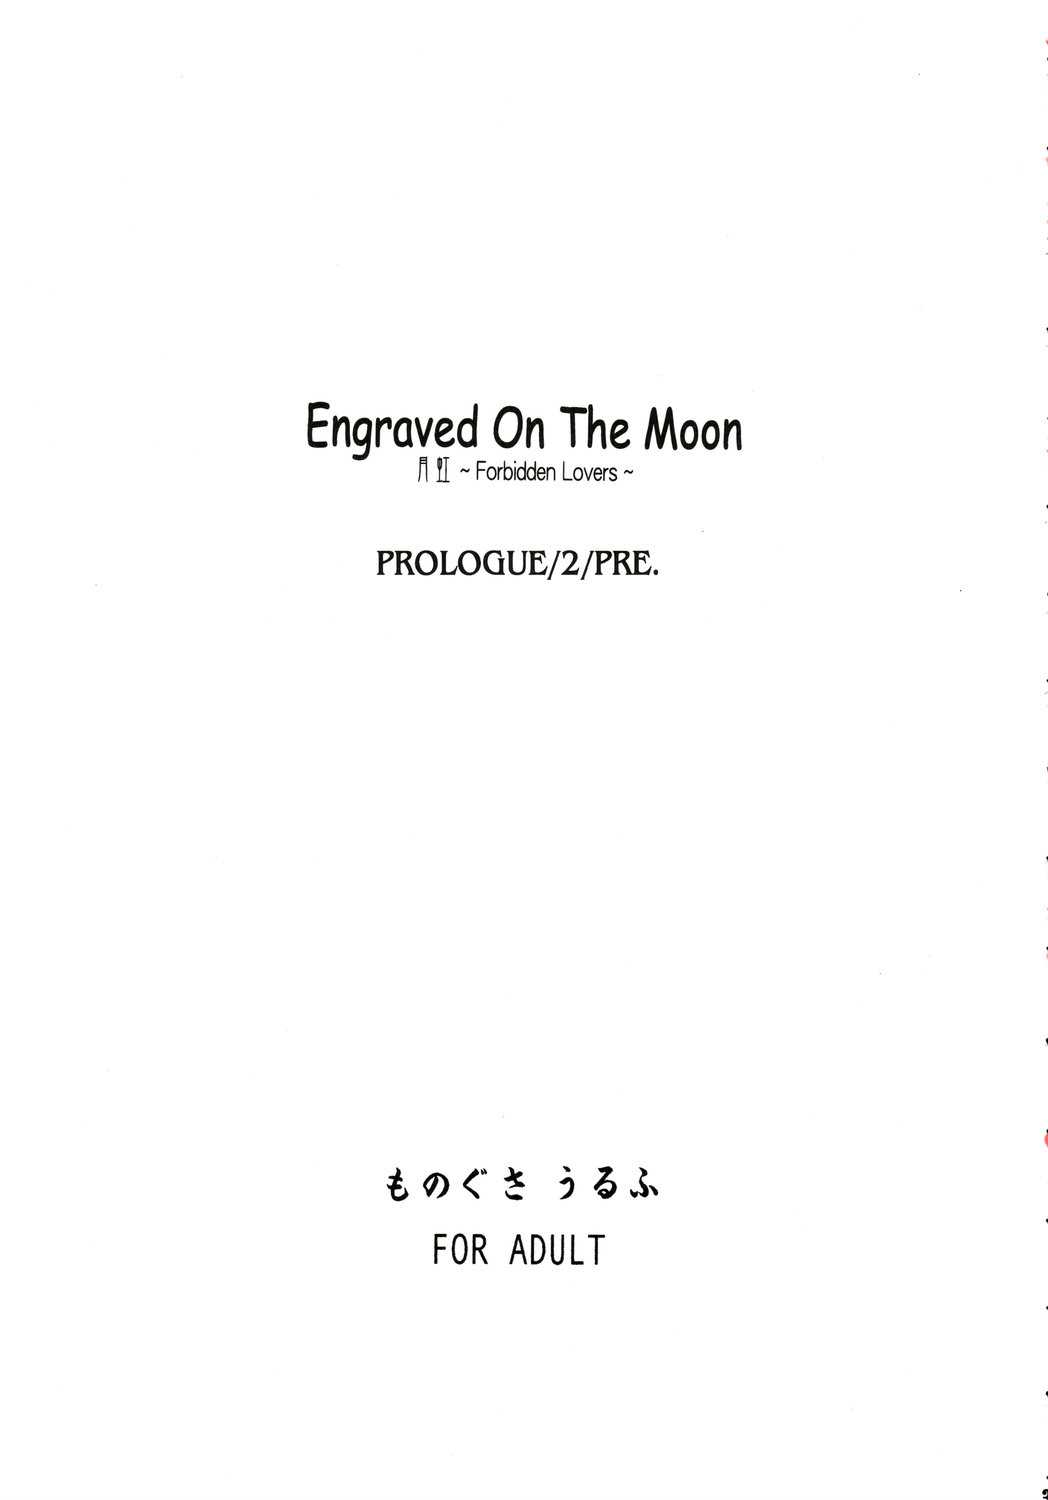 [Monogusa Wolf] Engraved On The Moon Prologue/2 (同人誌) [みずたま消防団] Engraved On The Moon ～Forbidden Lovers～ Prologue／2